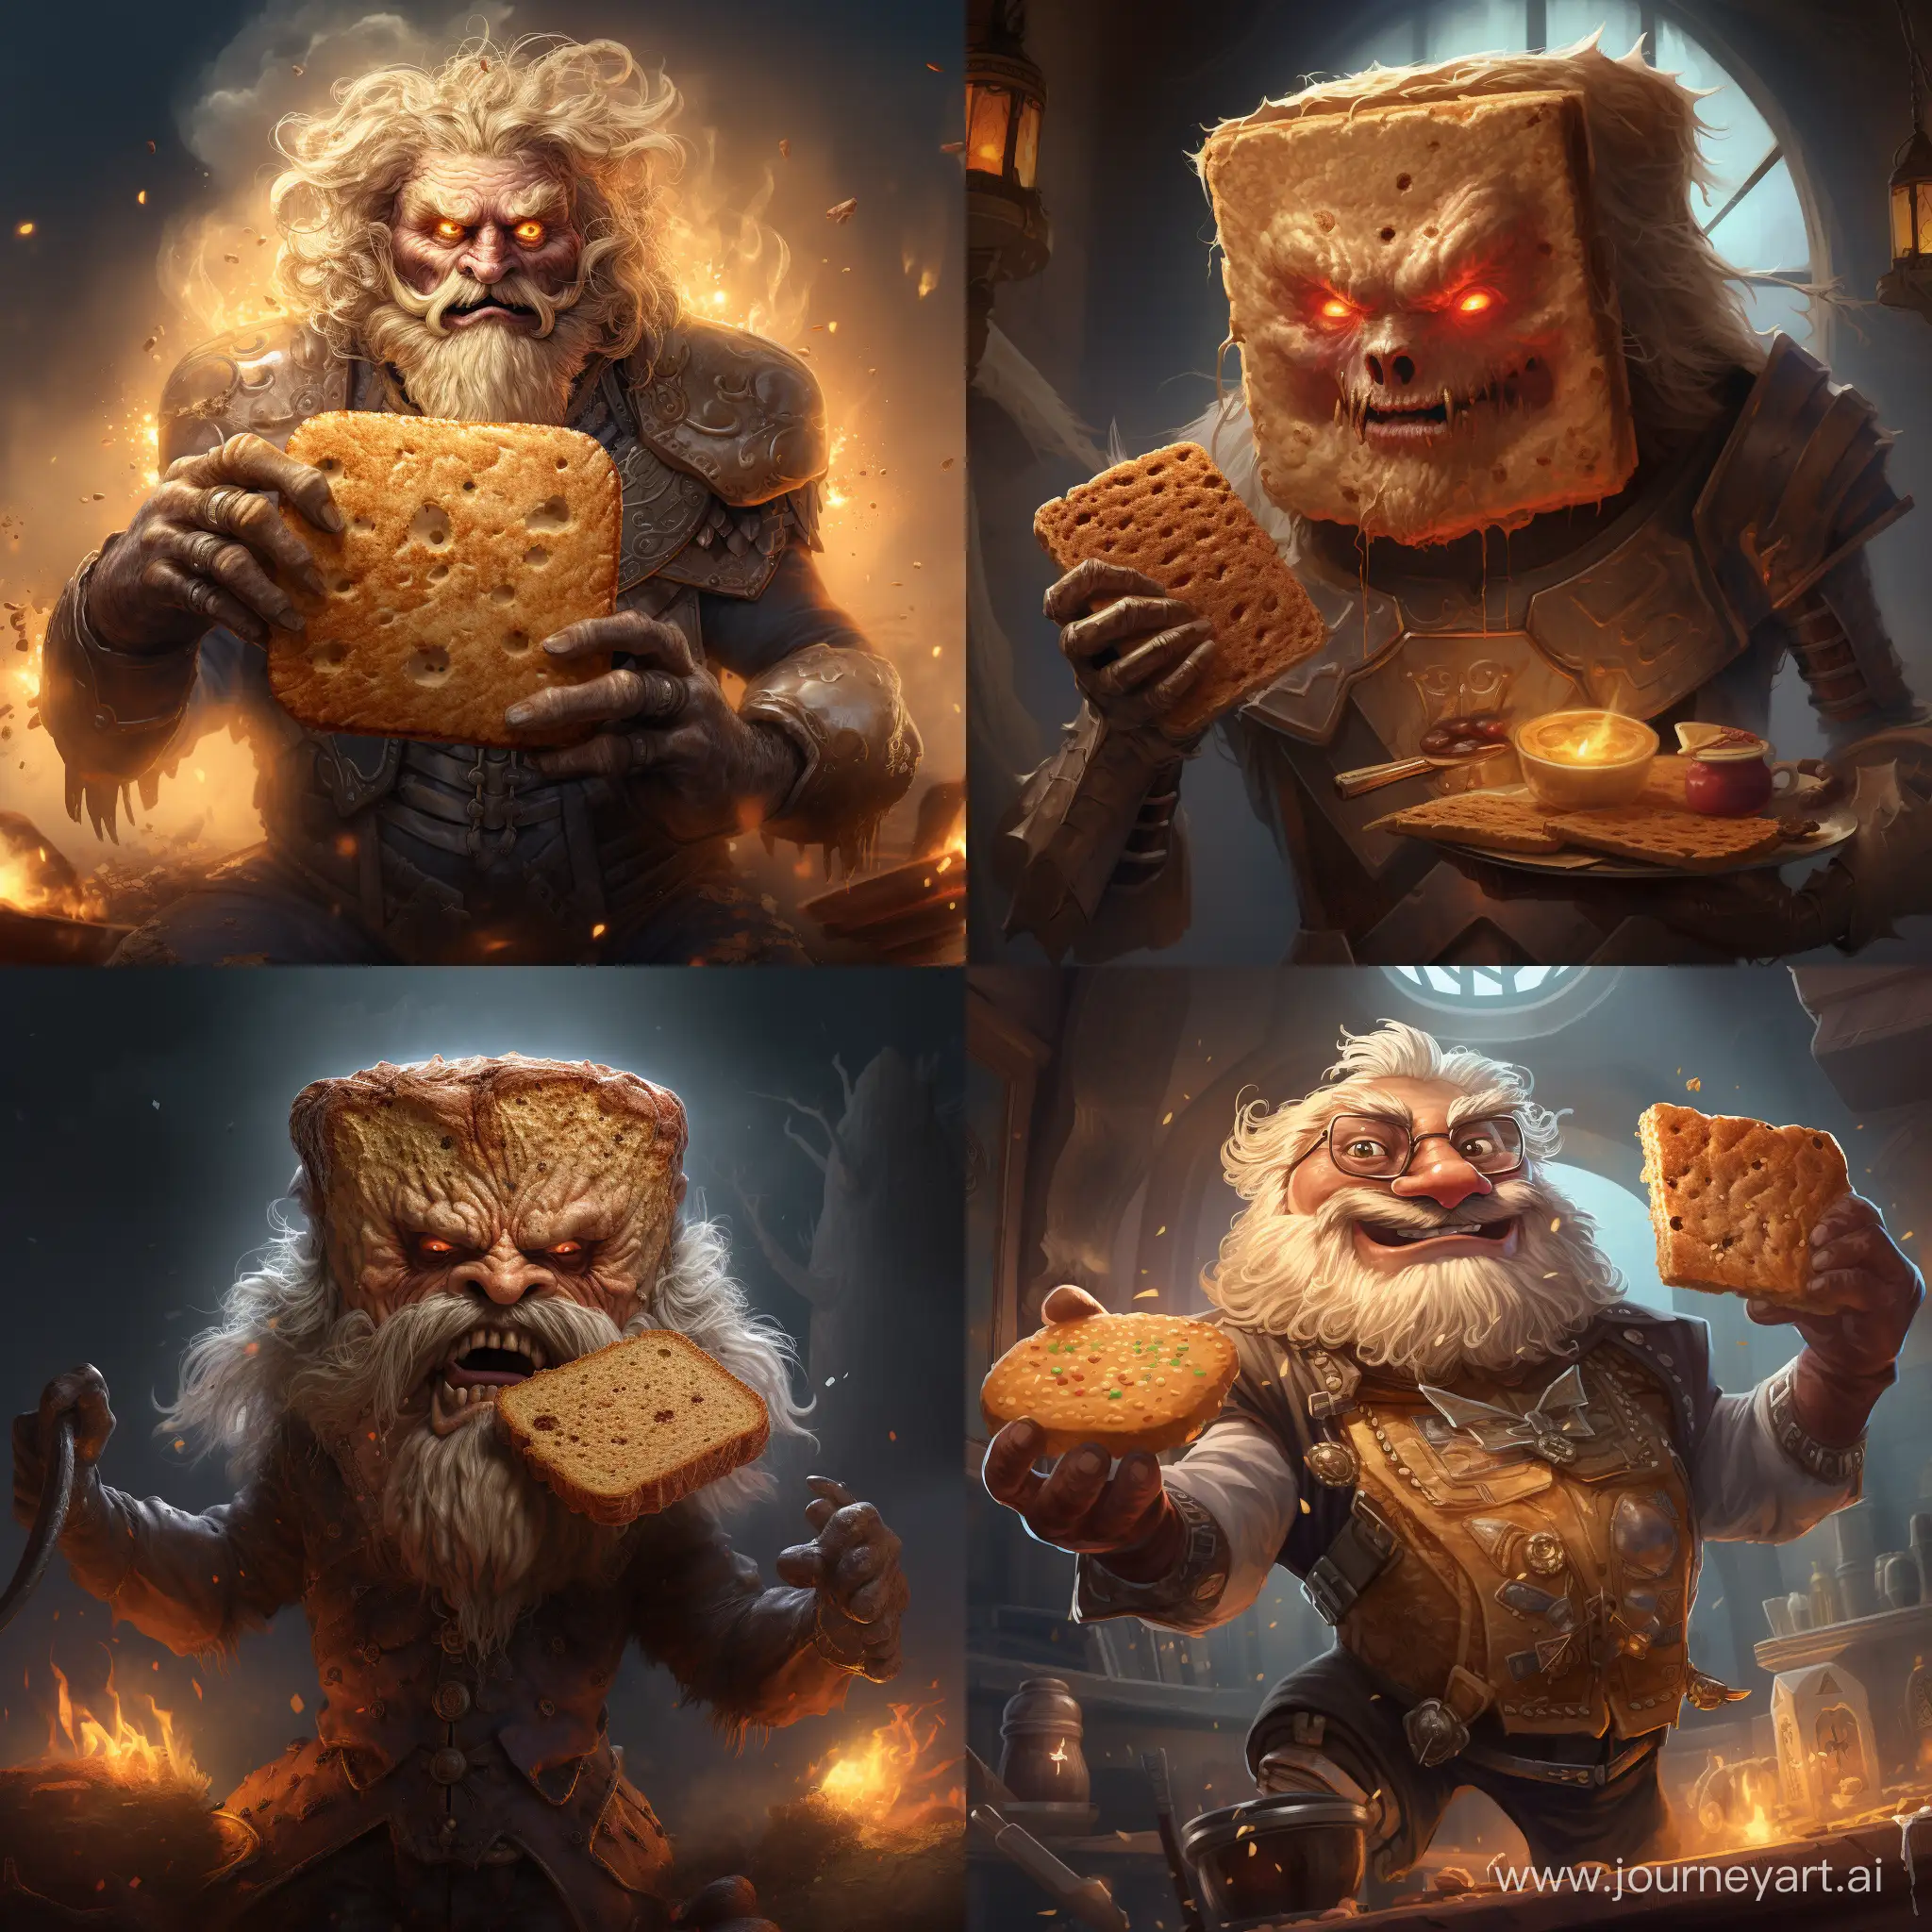 create a high fantasy character named Limp Toast